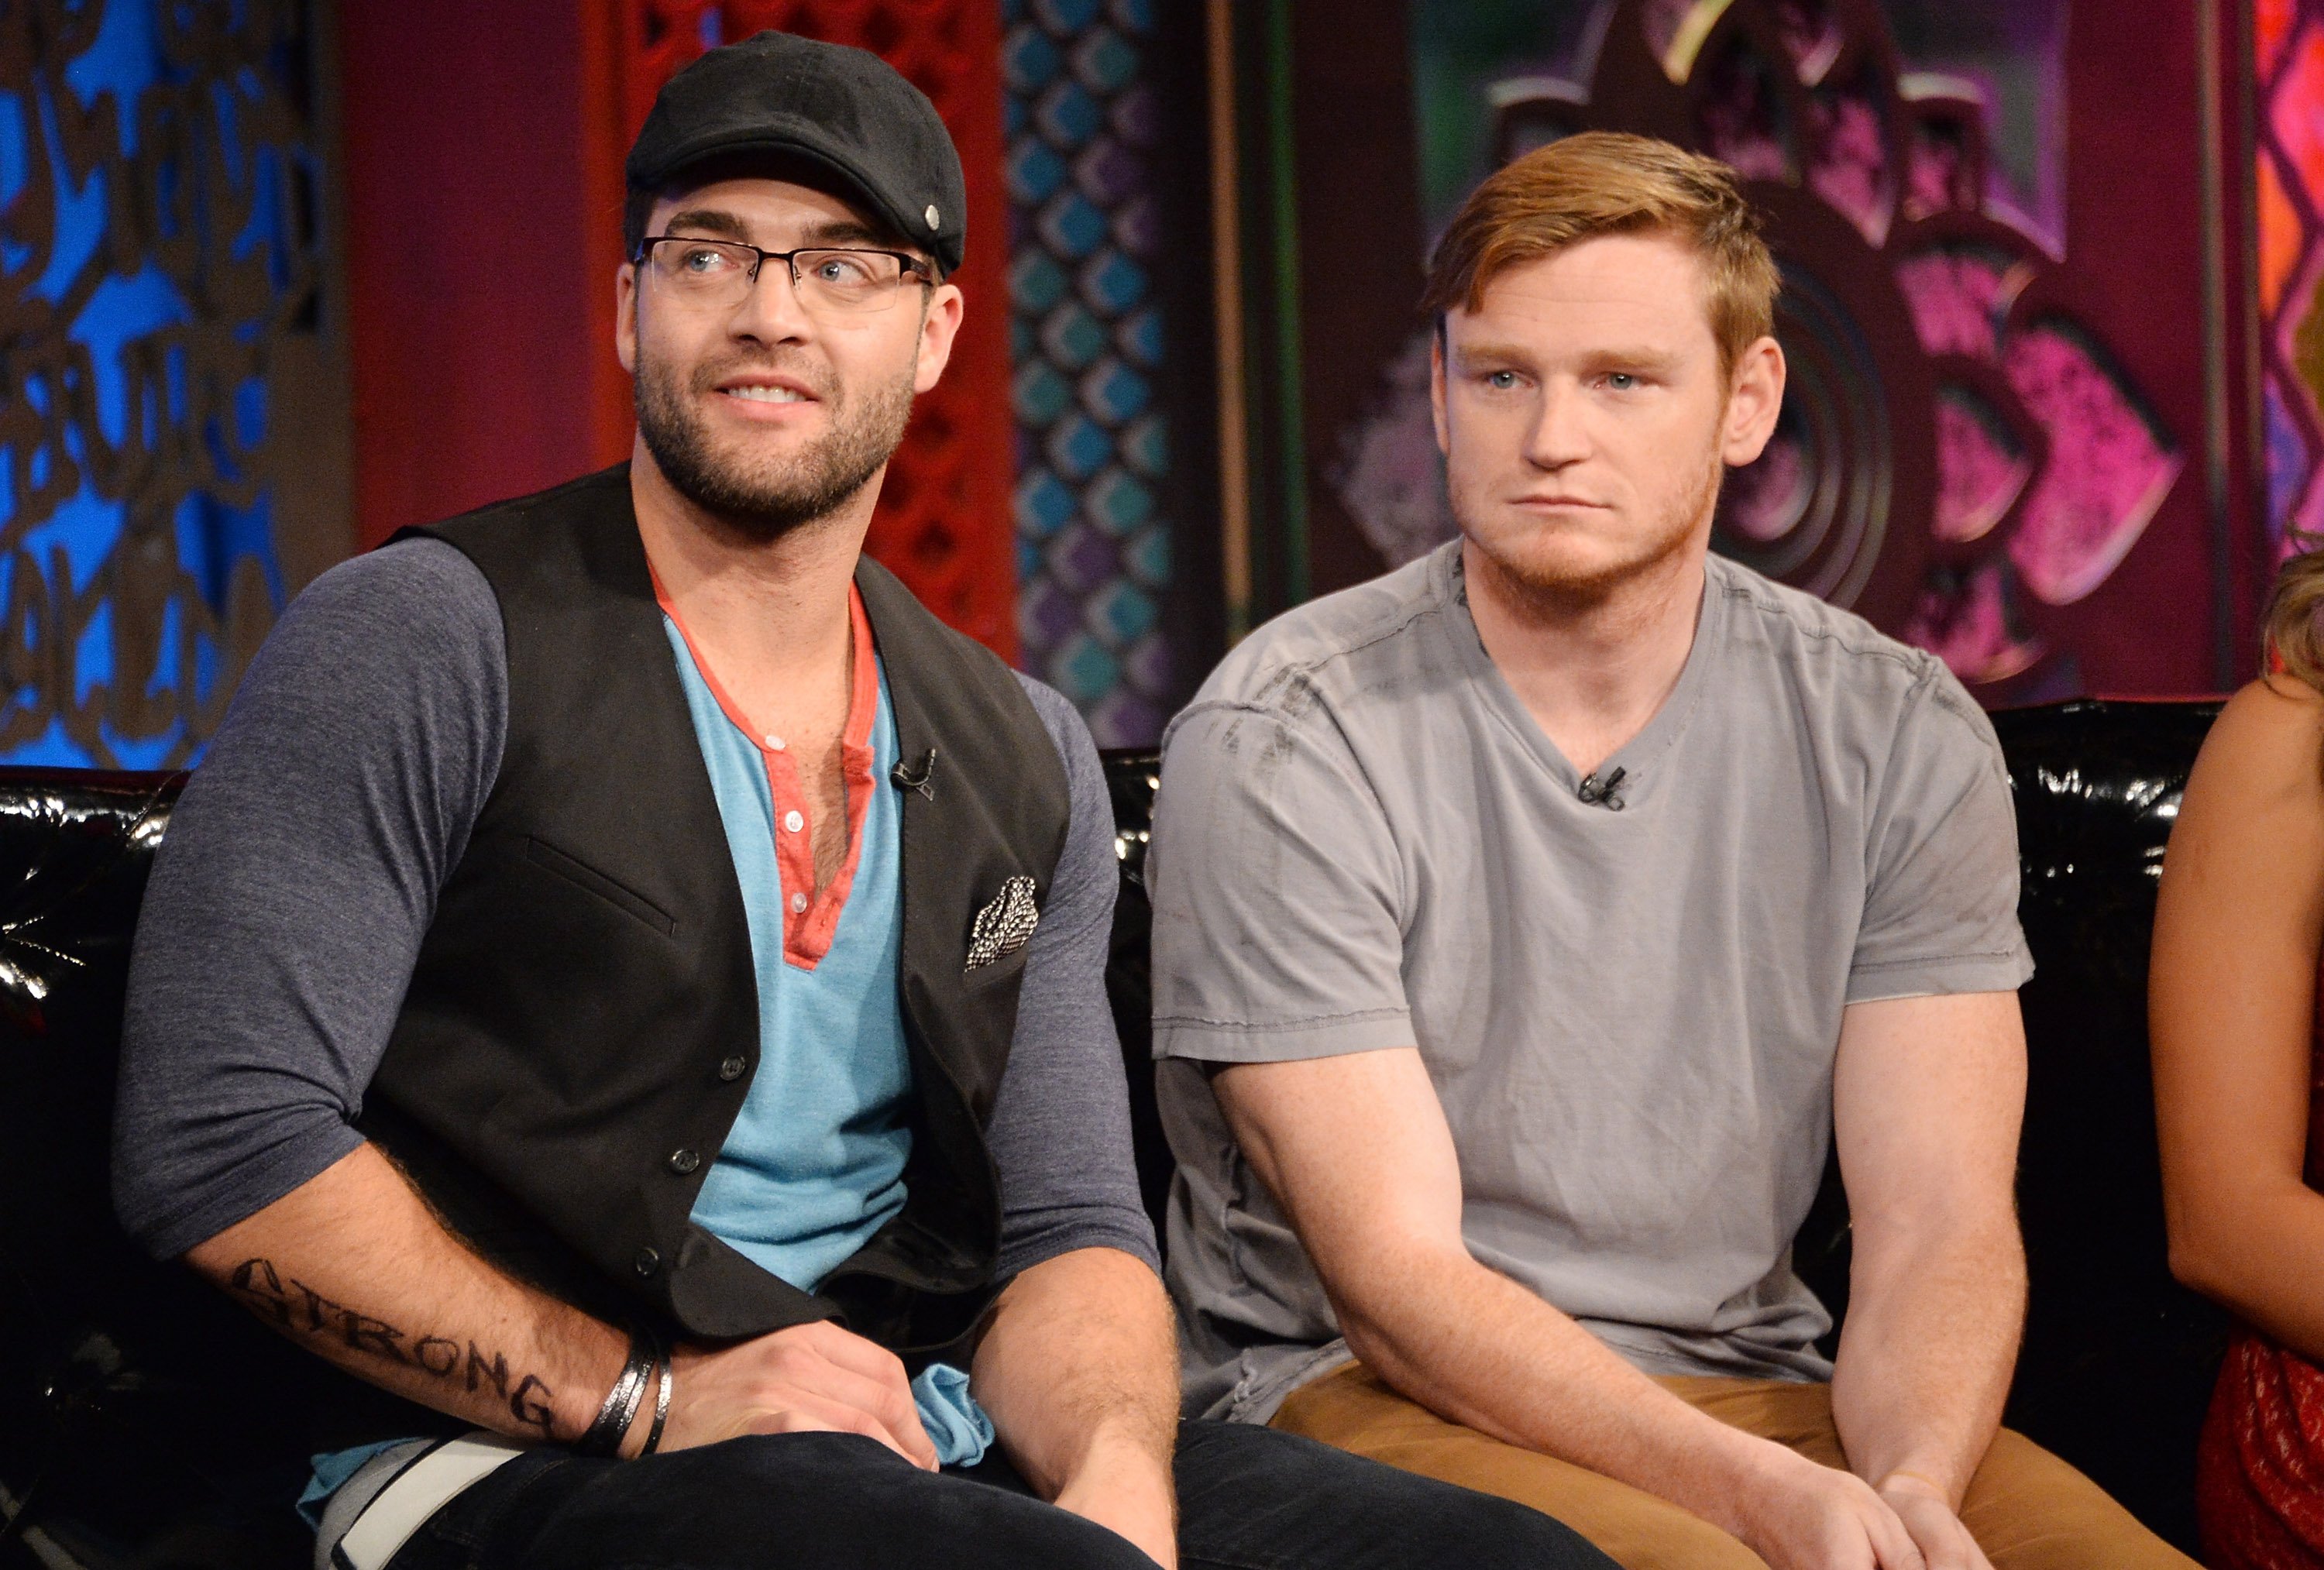 TV personality Chris "CT" Tamburello (L) and Wes Bergmann appear on MTV's "The Challenge: Rivals II" final episode and reunion party